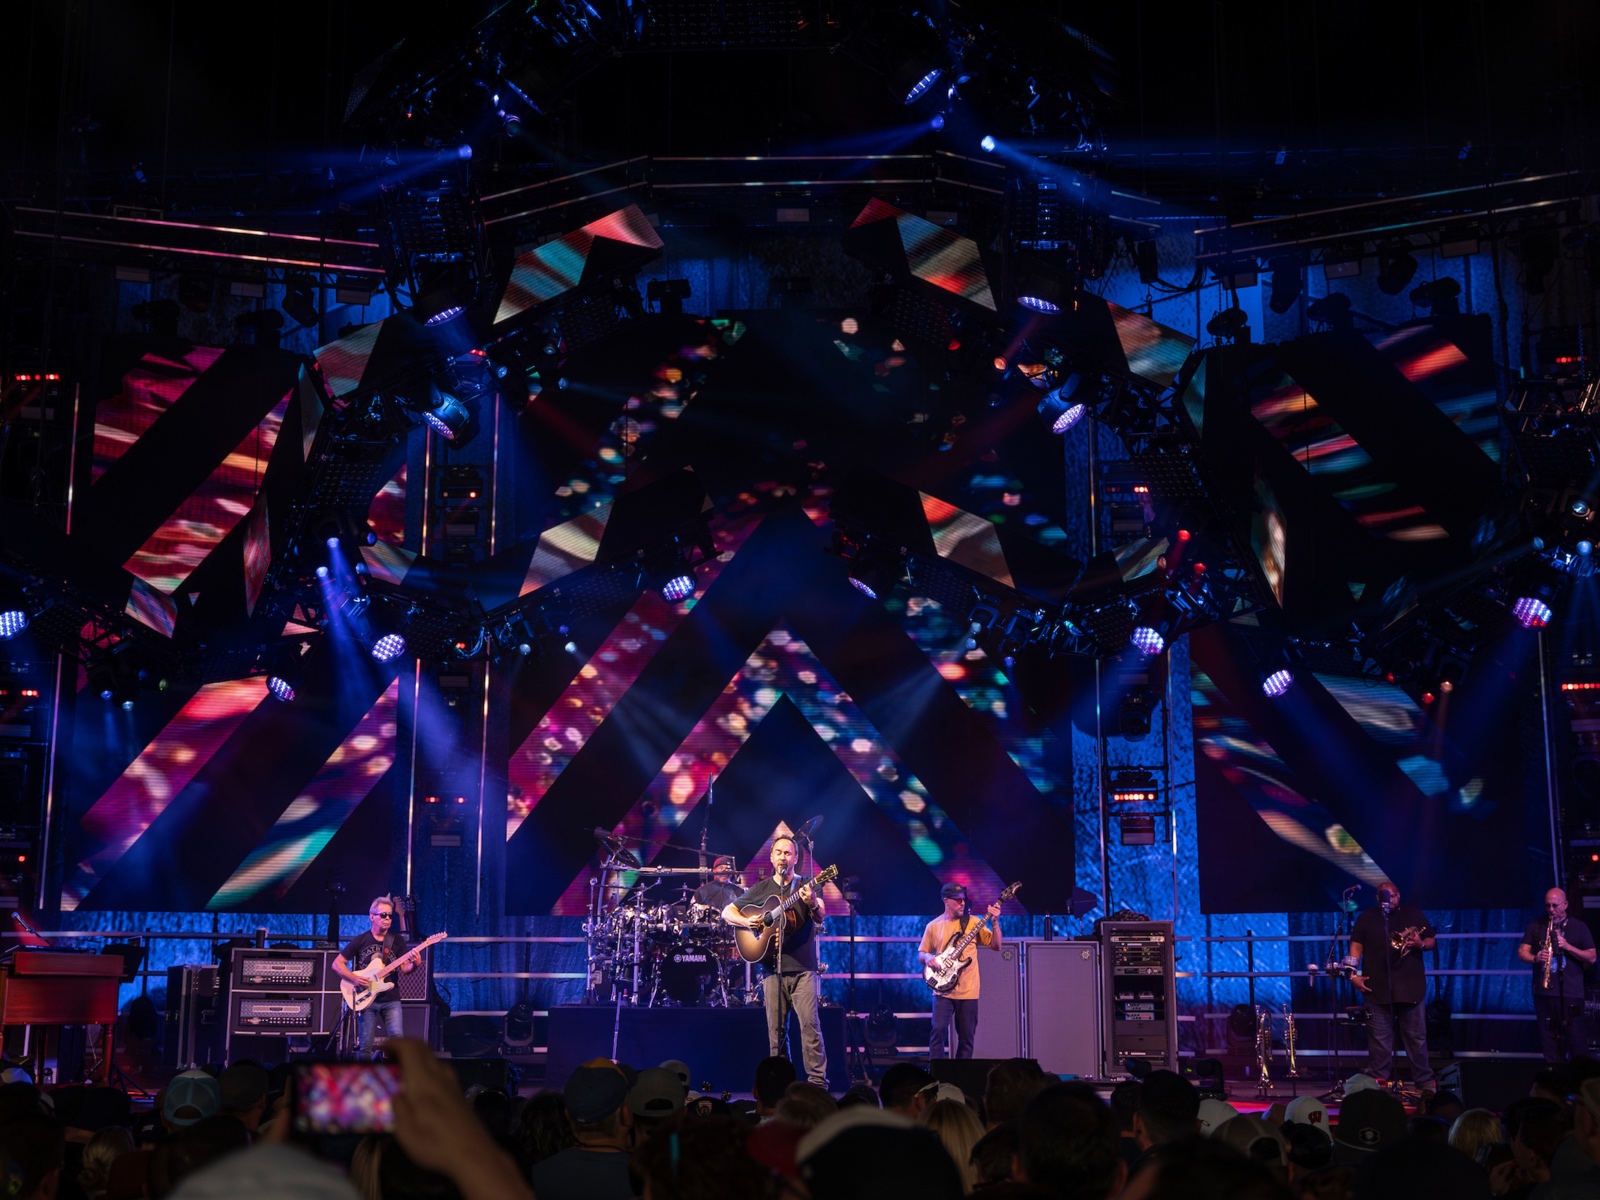 6 awesome images from Dave Matthews Band's headlining Summerfest show